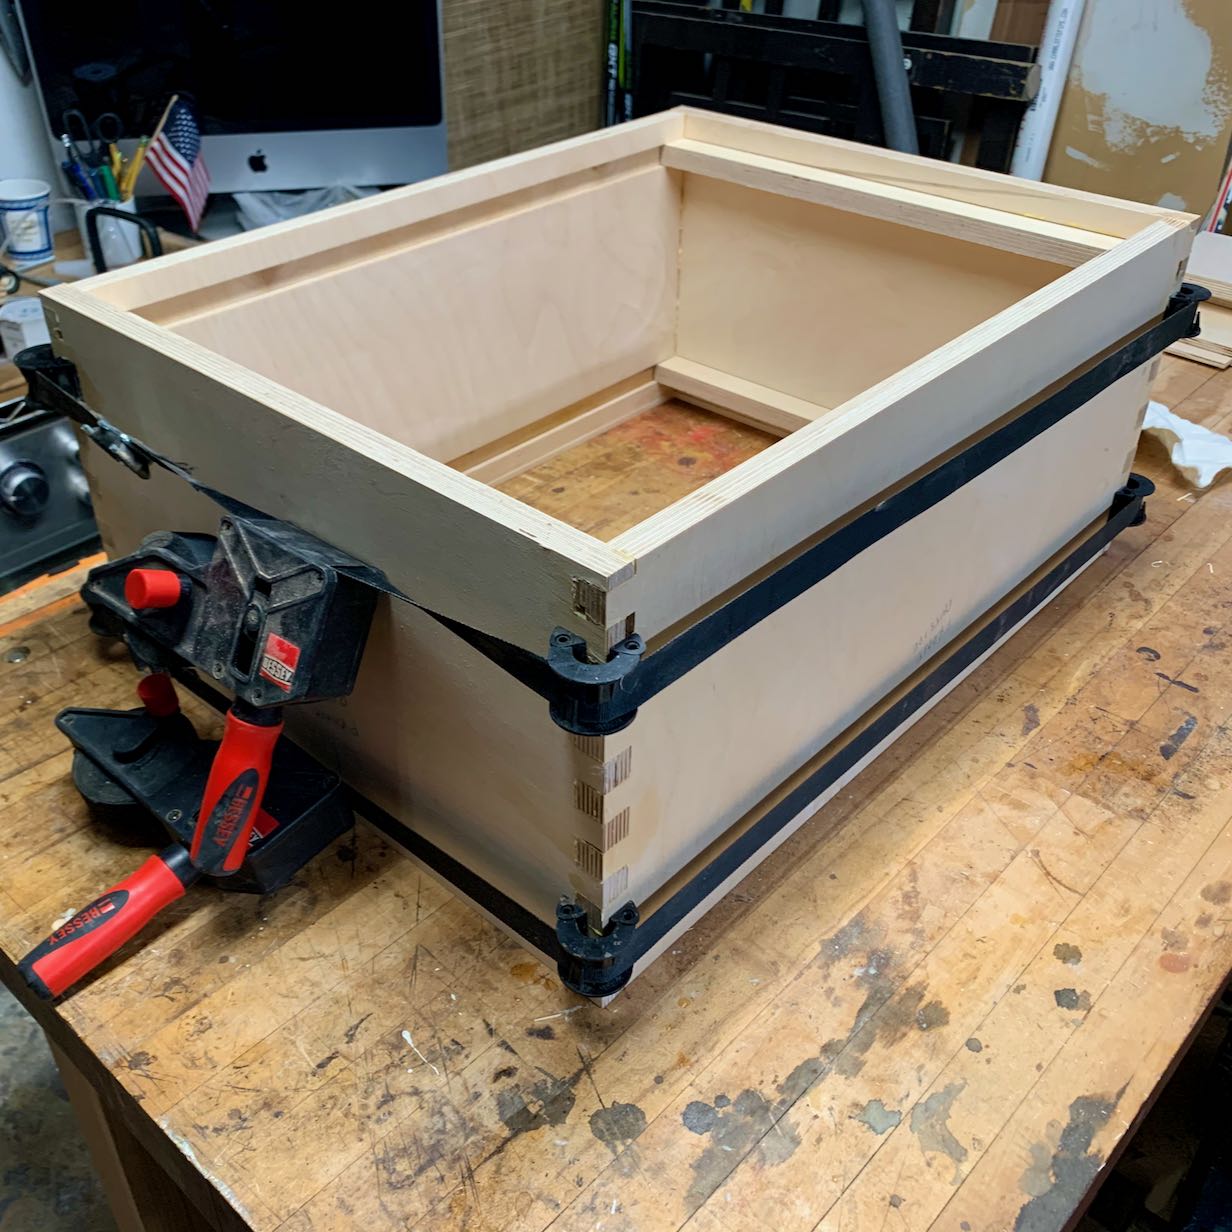 Build process photo showing a cabinet with finger joints, glued together and clamped